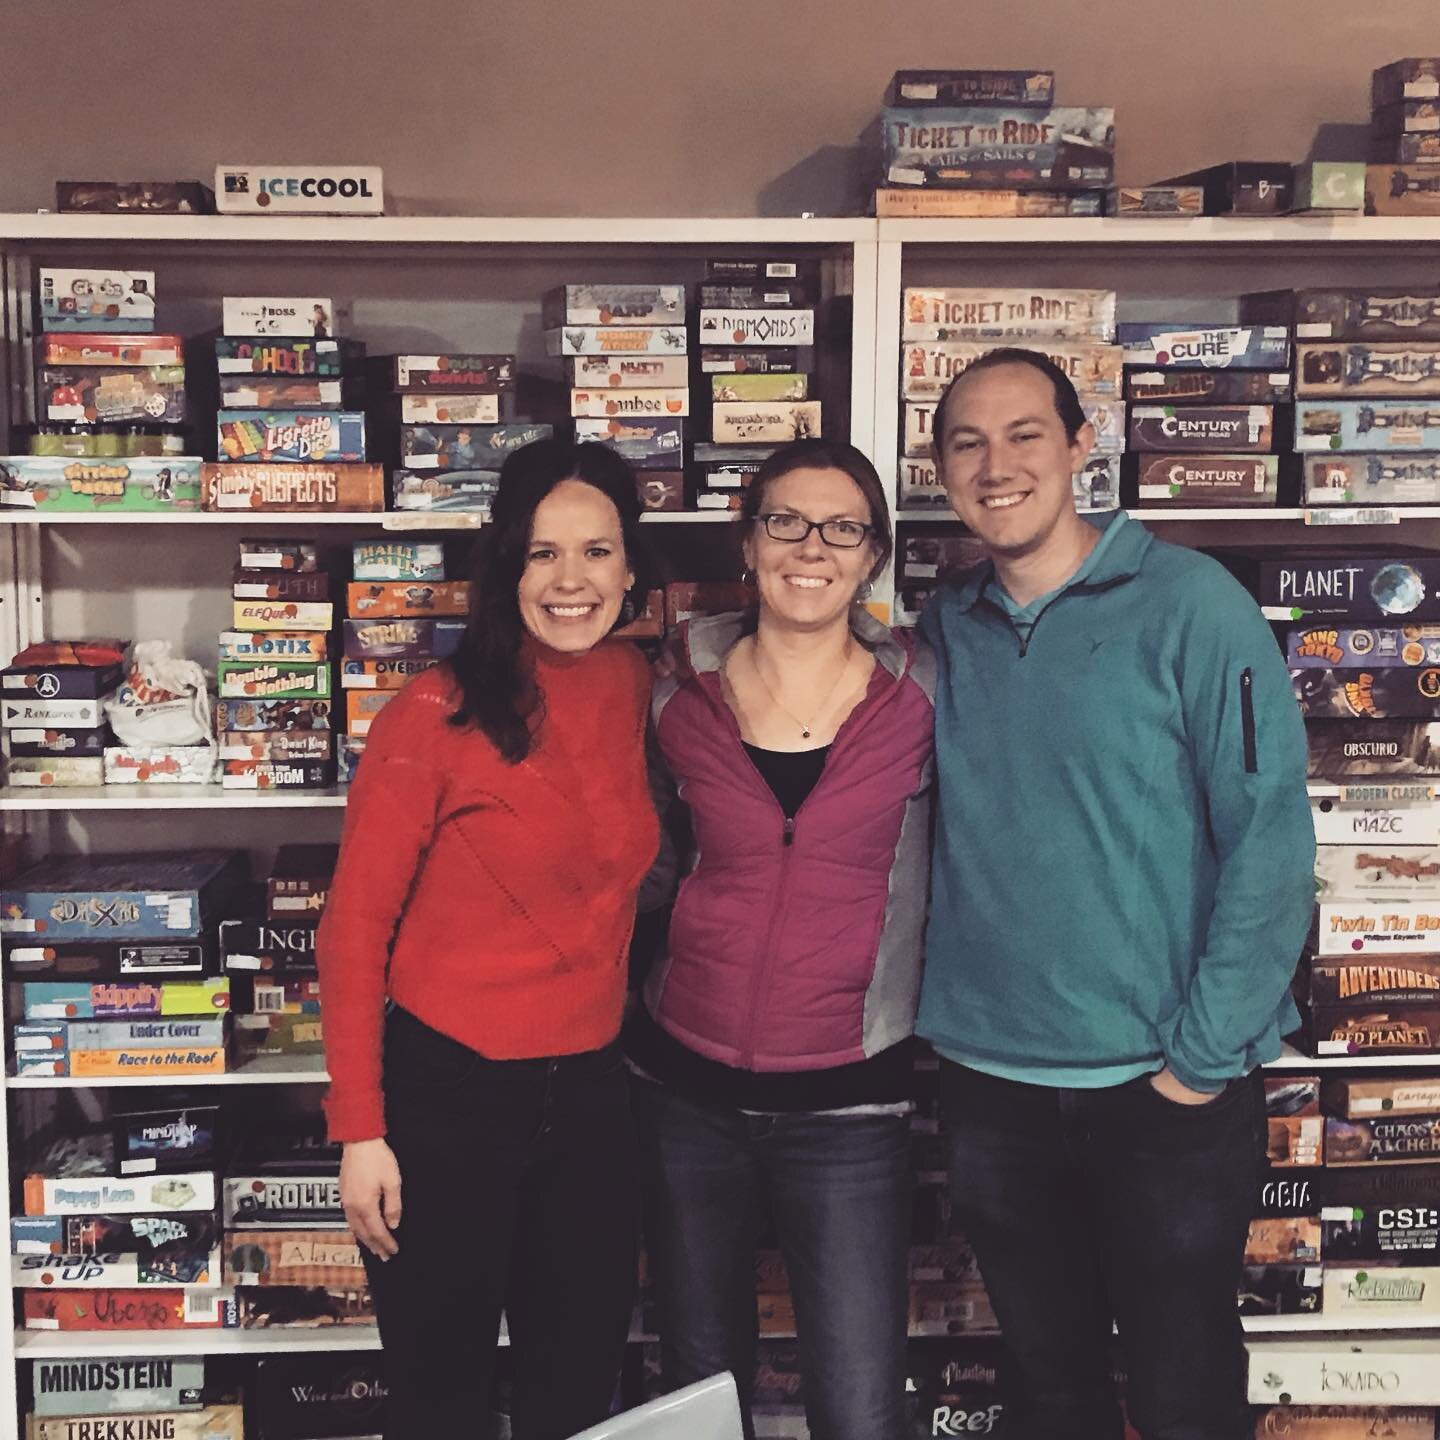 #10 on my 40-before-40 list: Learn a new board game with Jim and Jess at Boardgames Republic&mdash; a game lovers dream. We three have played SO many rounds of games over the past years and years and years. Most Friday nights I&rsquo;ve landed at the